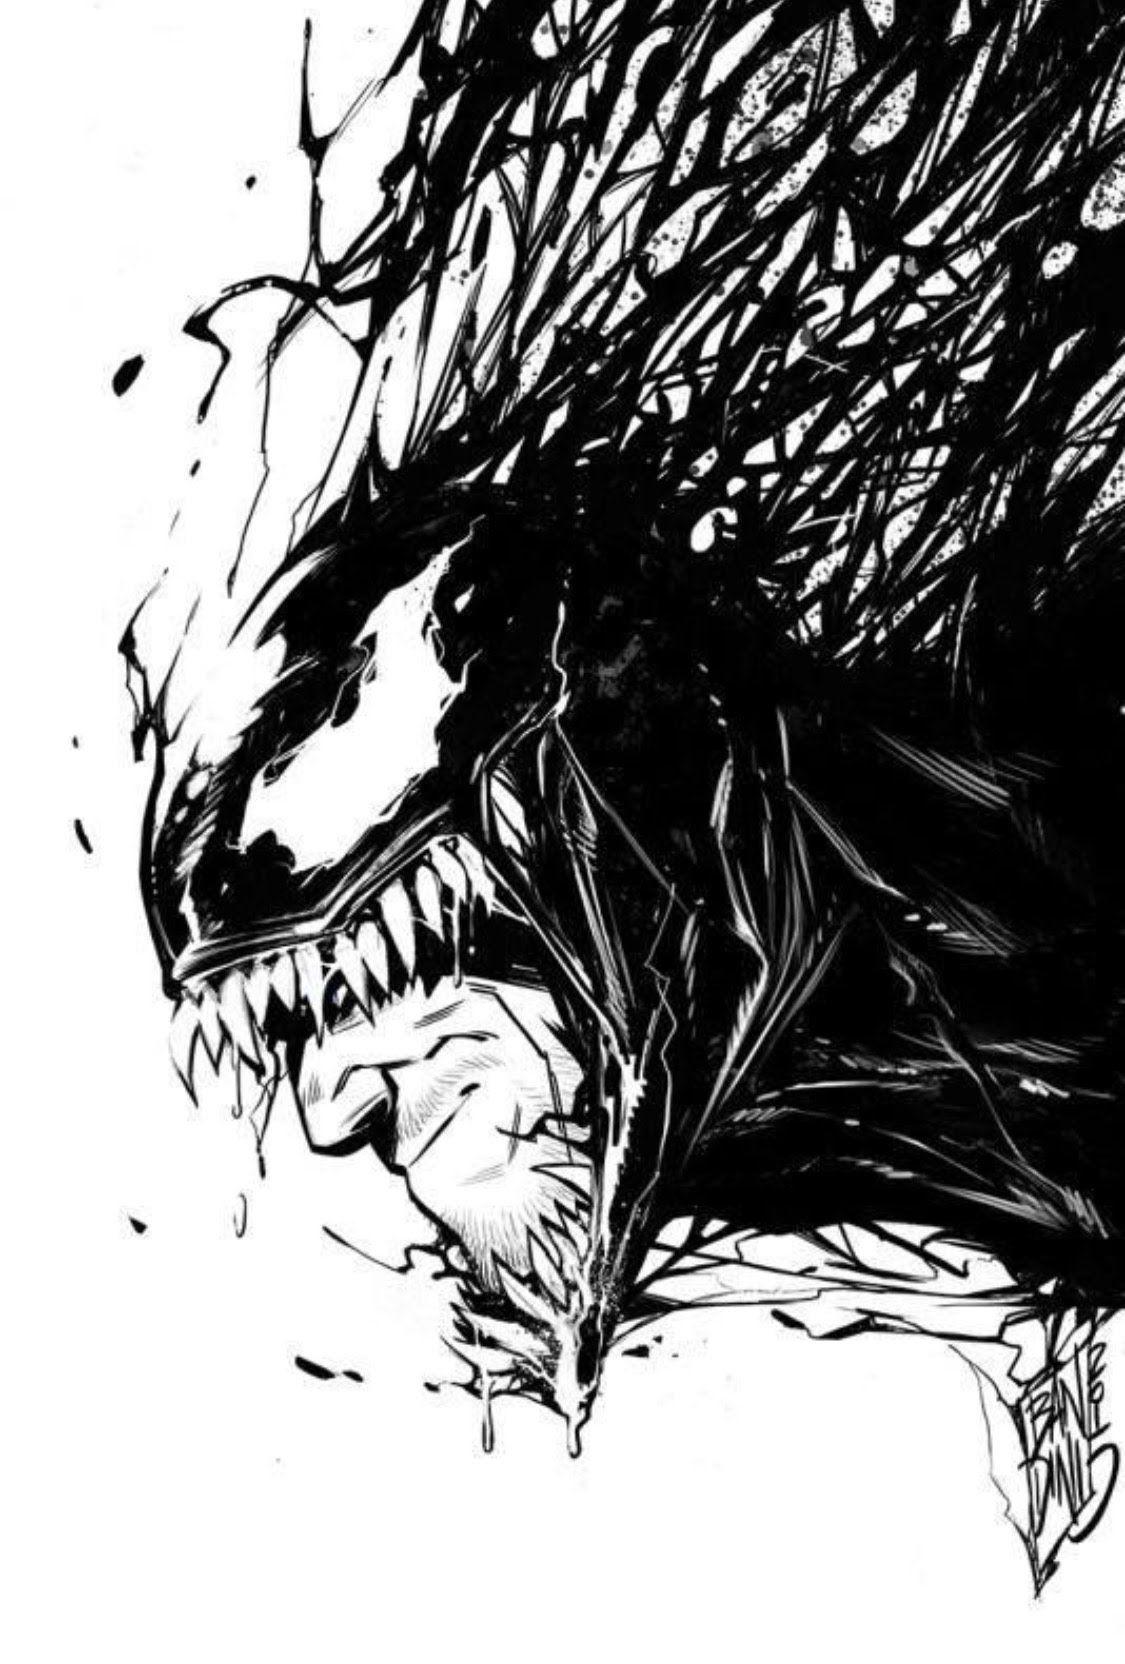 Venom Movie Is Coming Staring Tom Hardy as Eddie Brock, Check Out